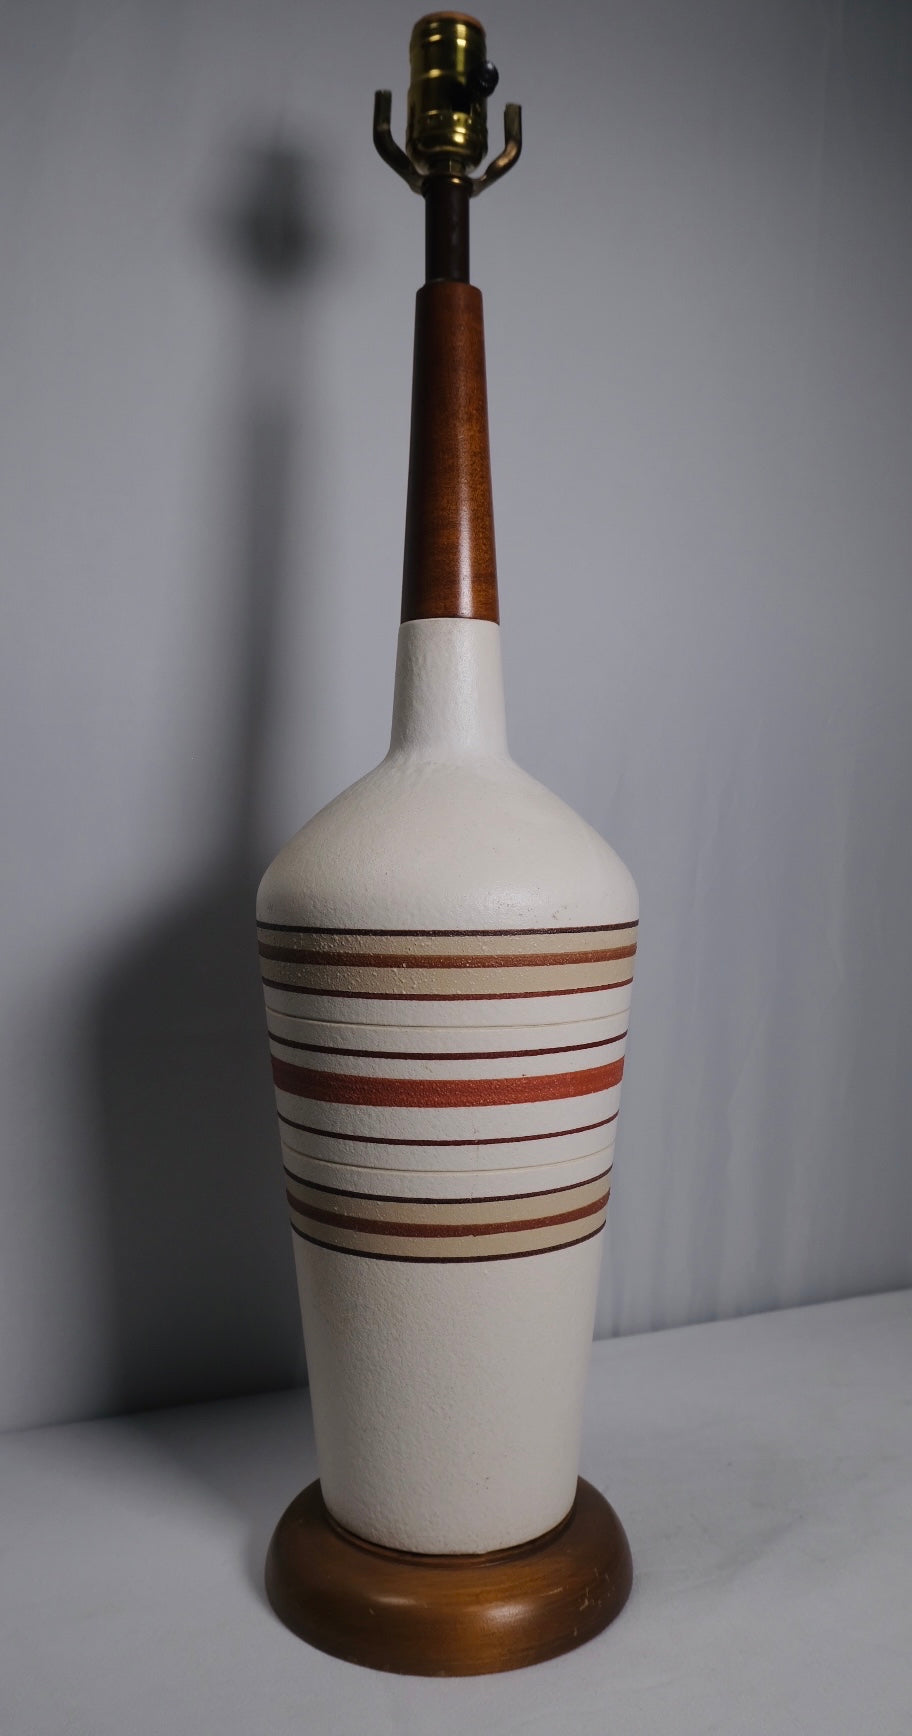 MCM 1960s Italian Banded Pottery Lamp (Vintage)